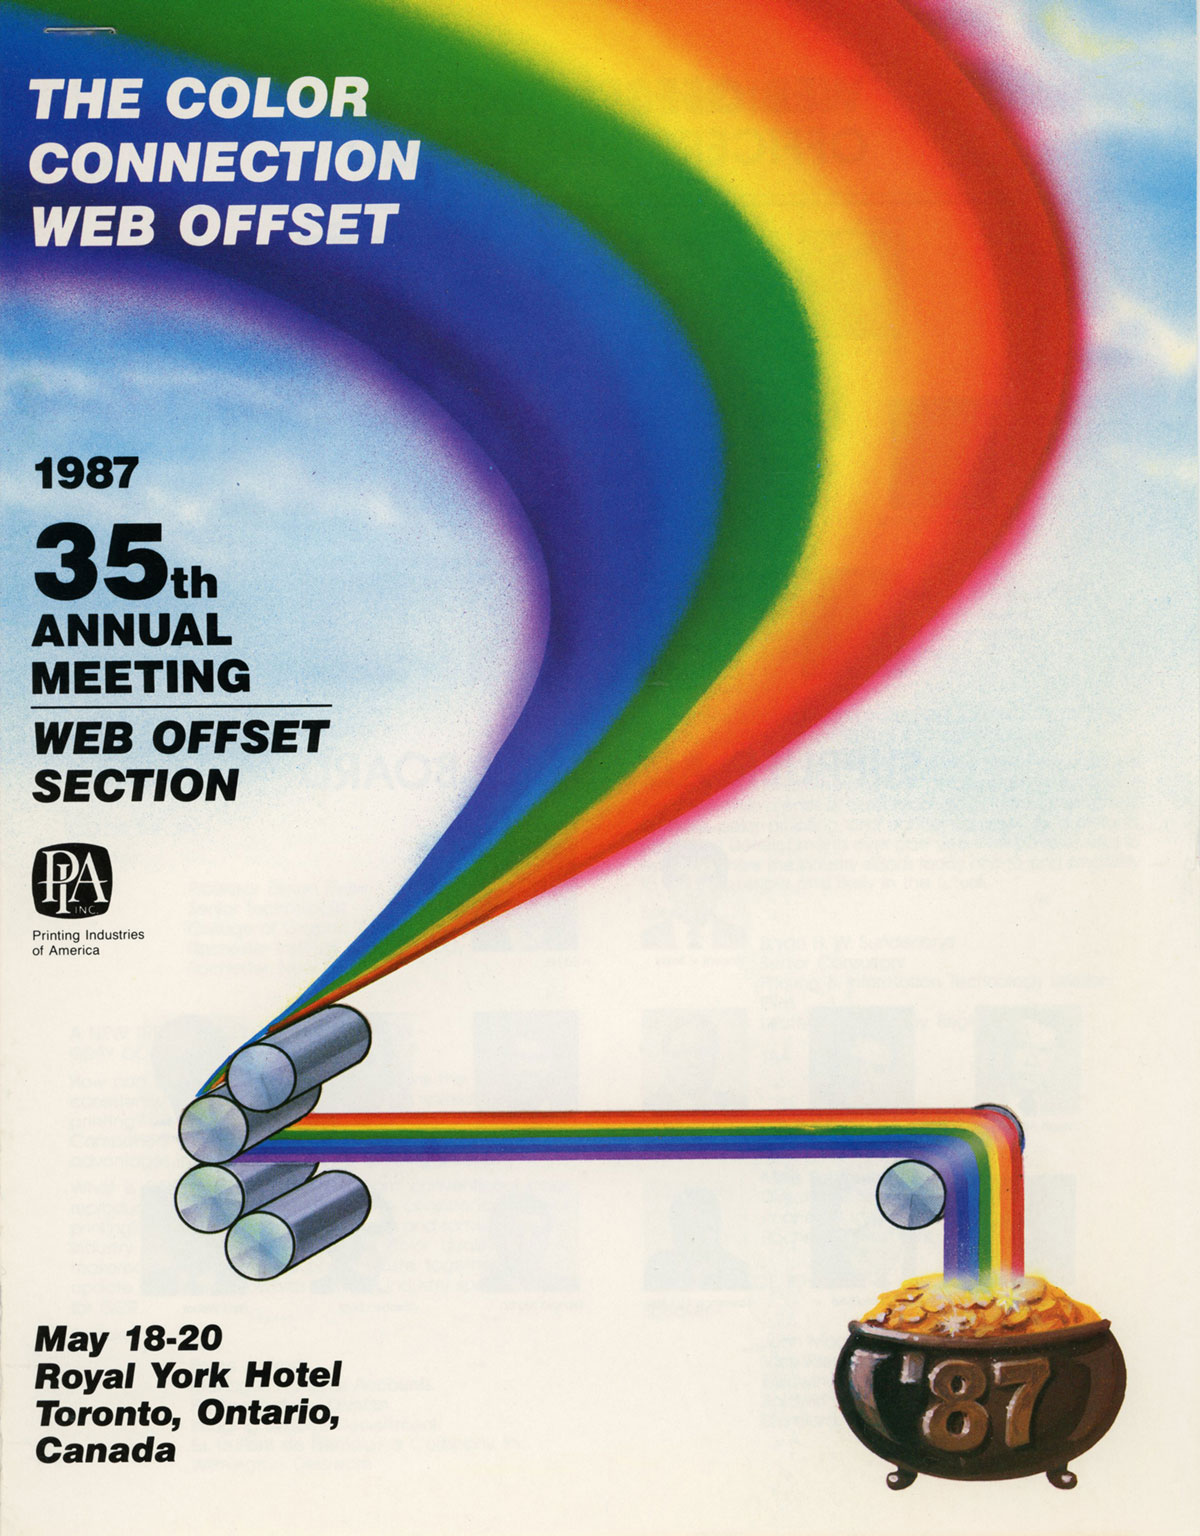 The Color Connection Web Offset 1987 35th annual meeting web offset section May 18-20 Royal York Hotel Toronto, Ontario, Canada